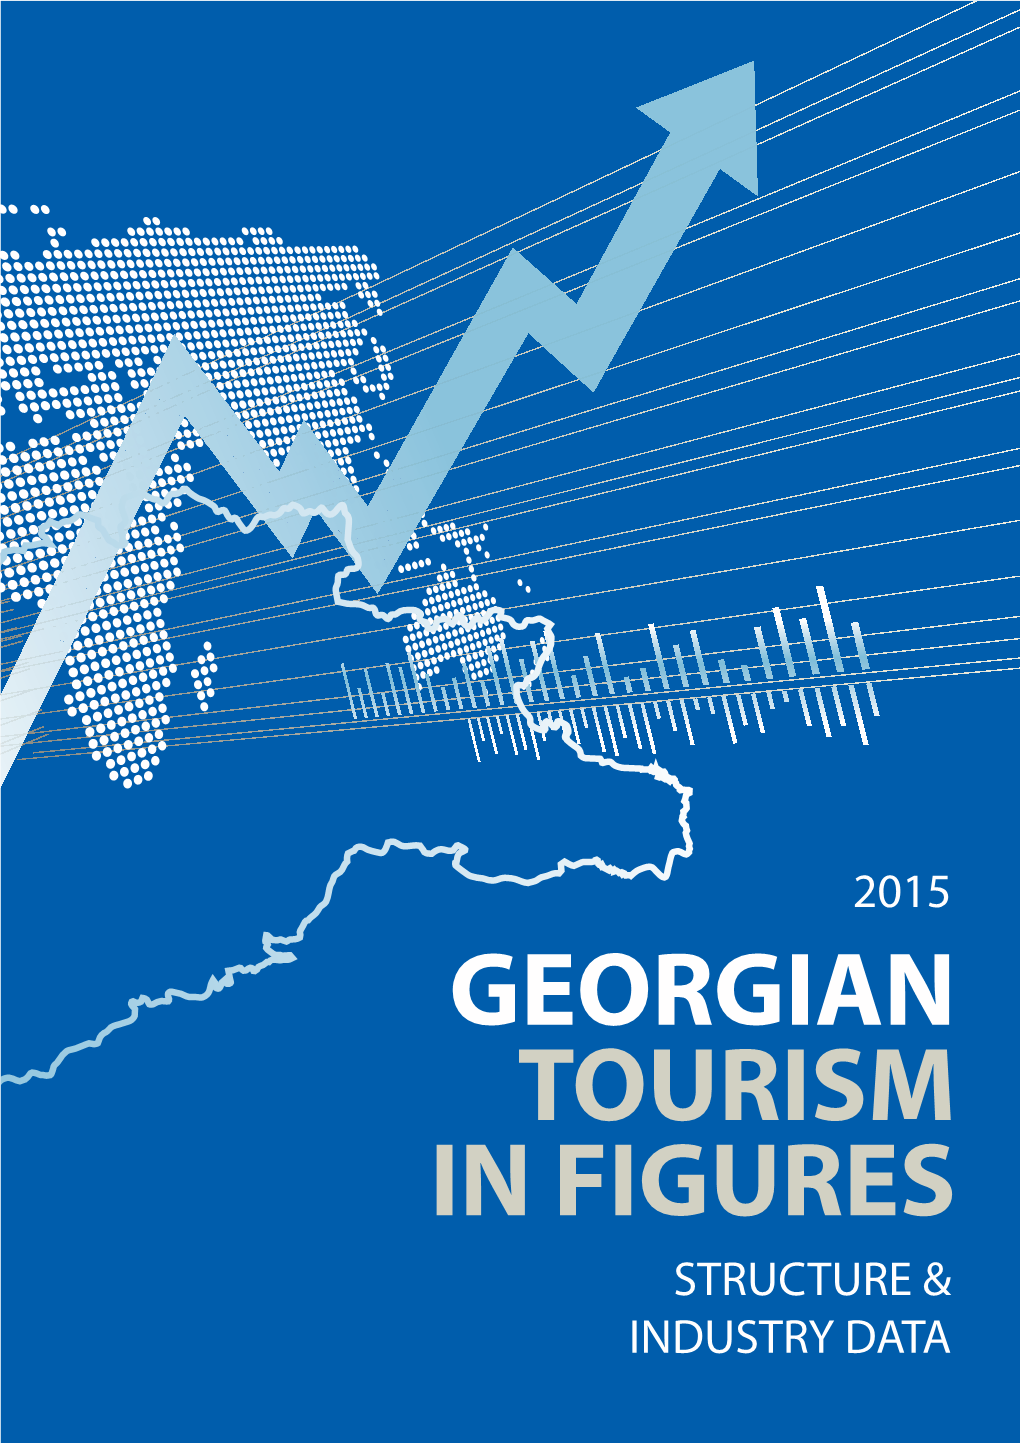 GEORGIAN TOURISM in FIGURES STRUCTURE & INDUSTRY DATA Summary